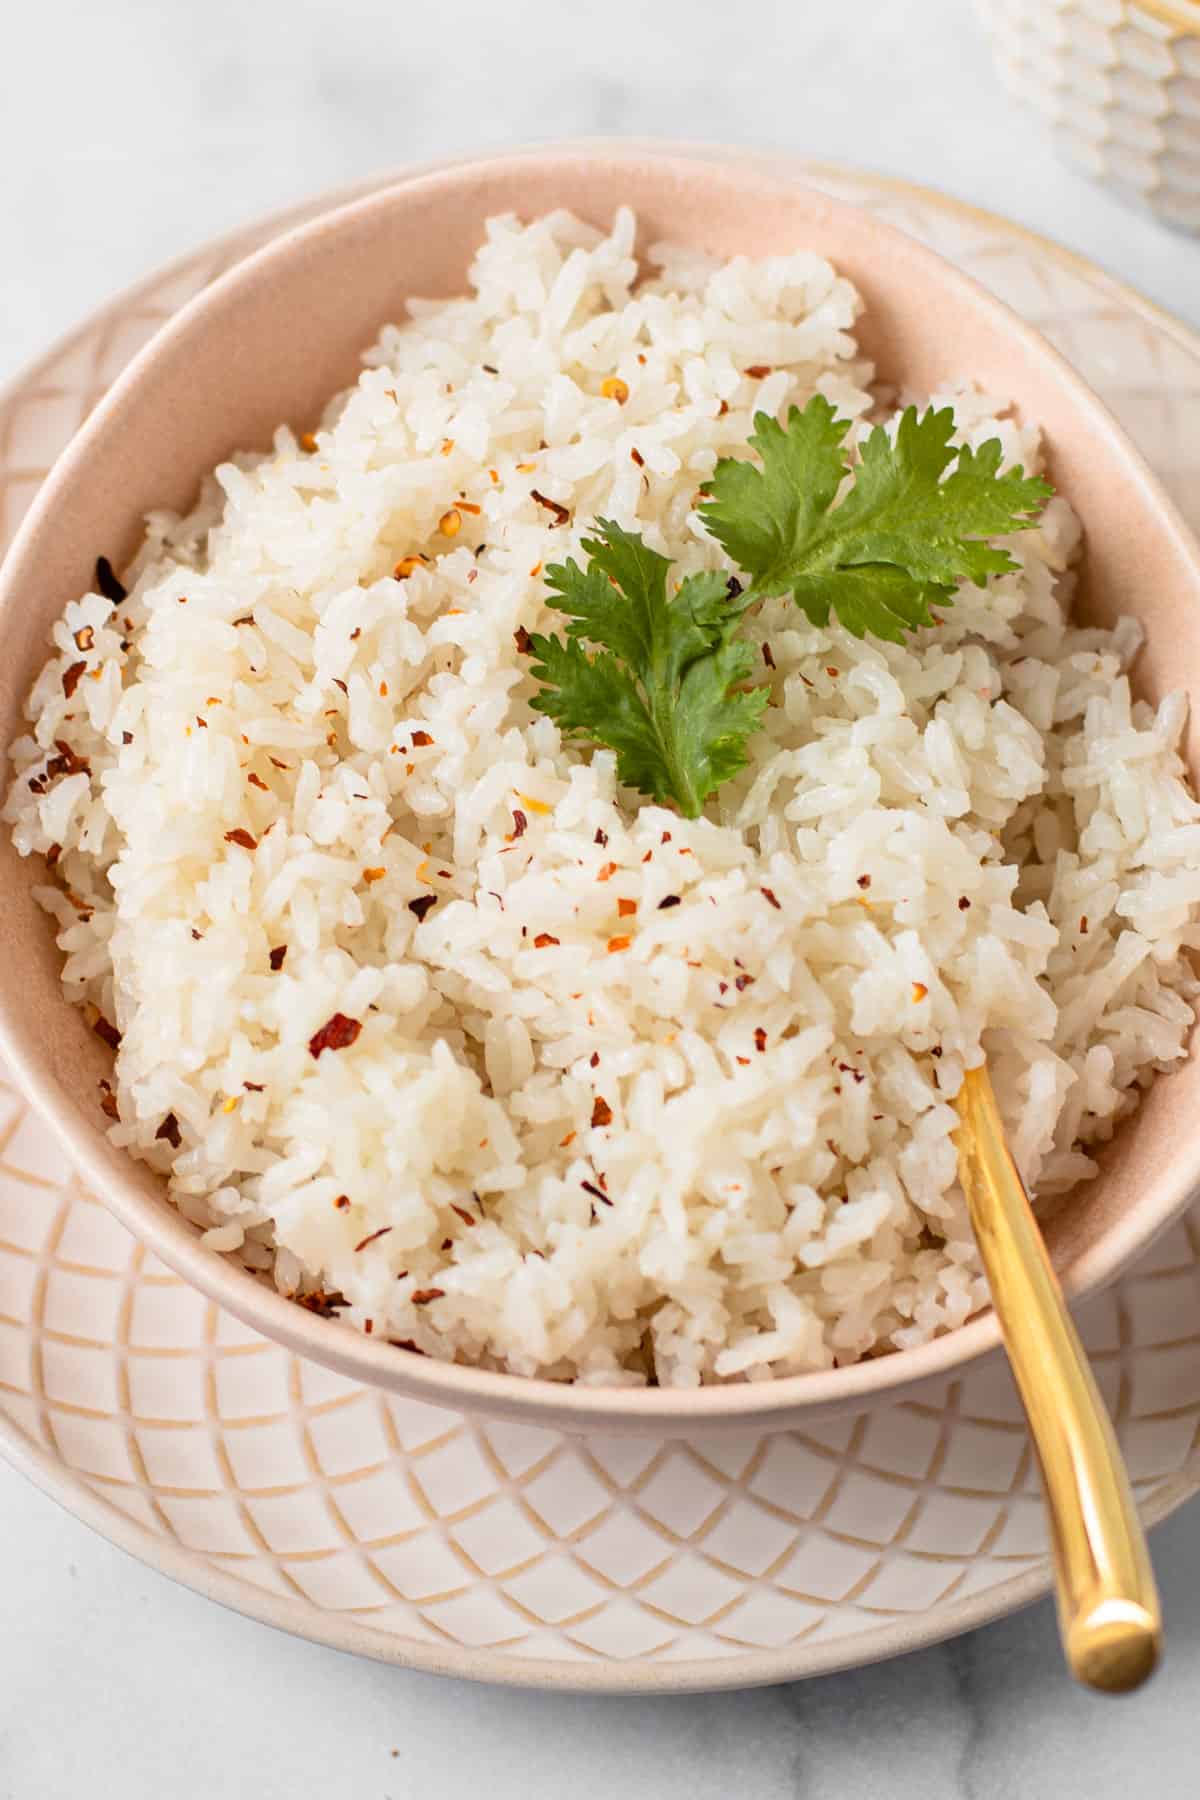 Coconut rice in a bowl with a piece of cilantro.